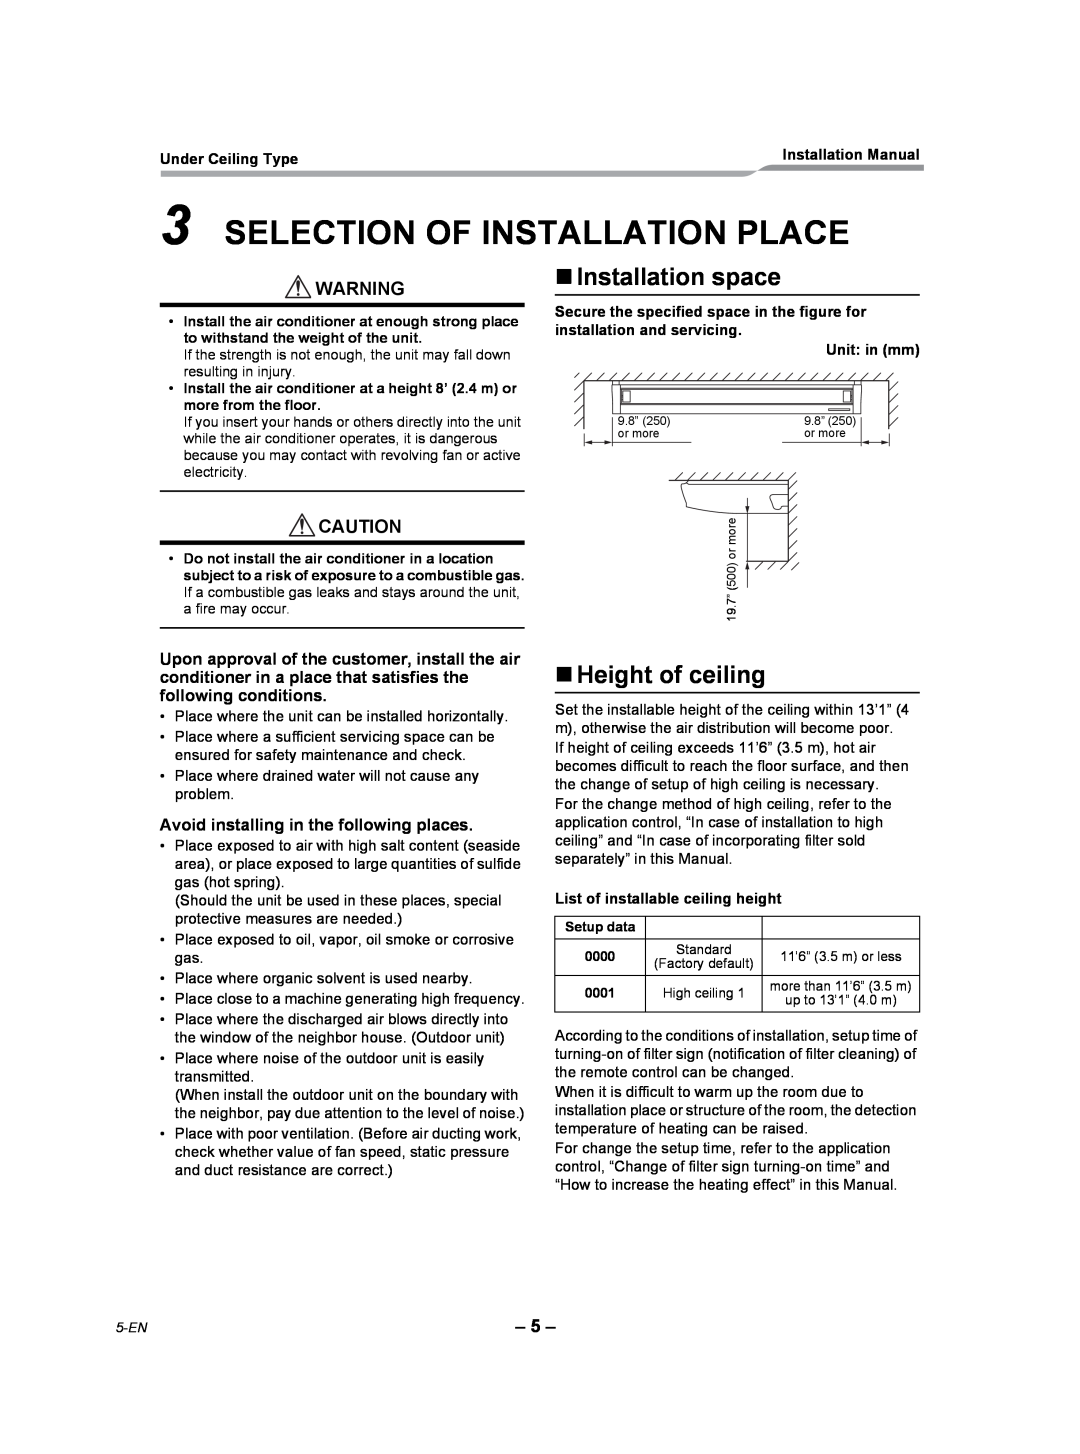 Toshiba RAV-SP300CT-UL Selection Of Installation Place, „Installation space, „Height of ceiling, Under Ceiling Type 